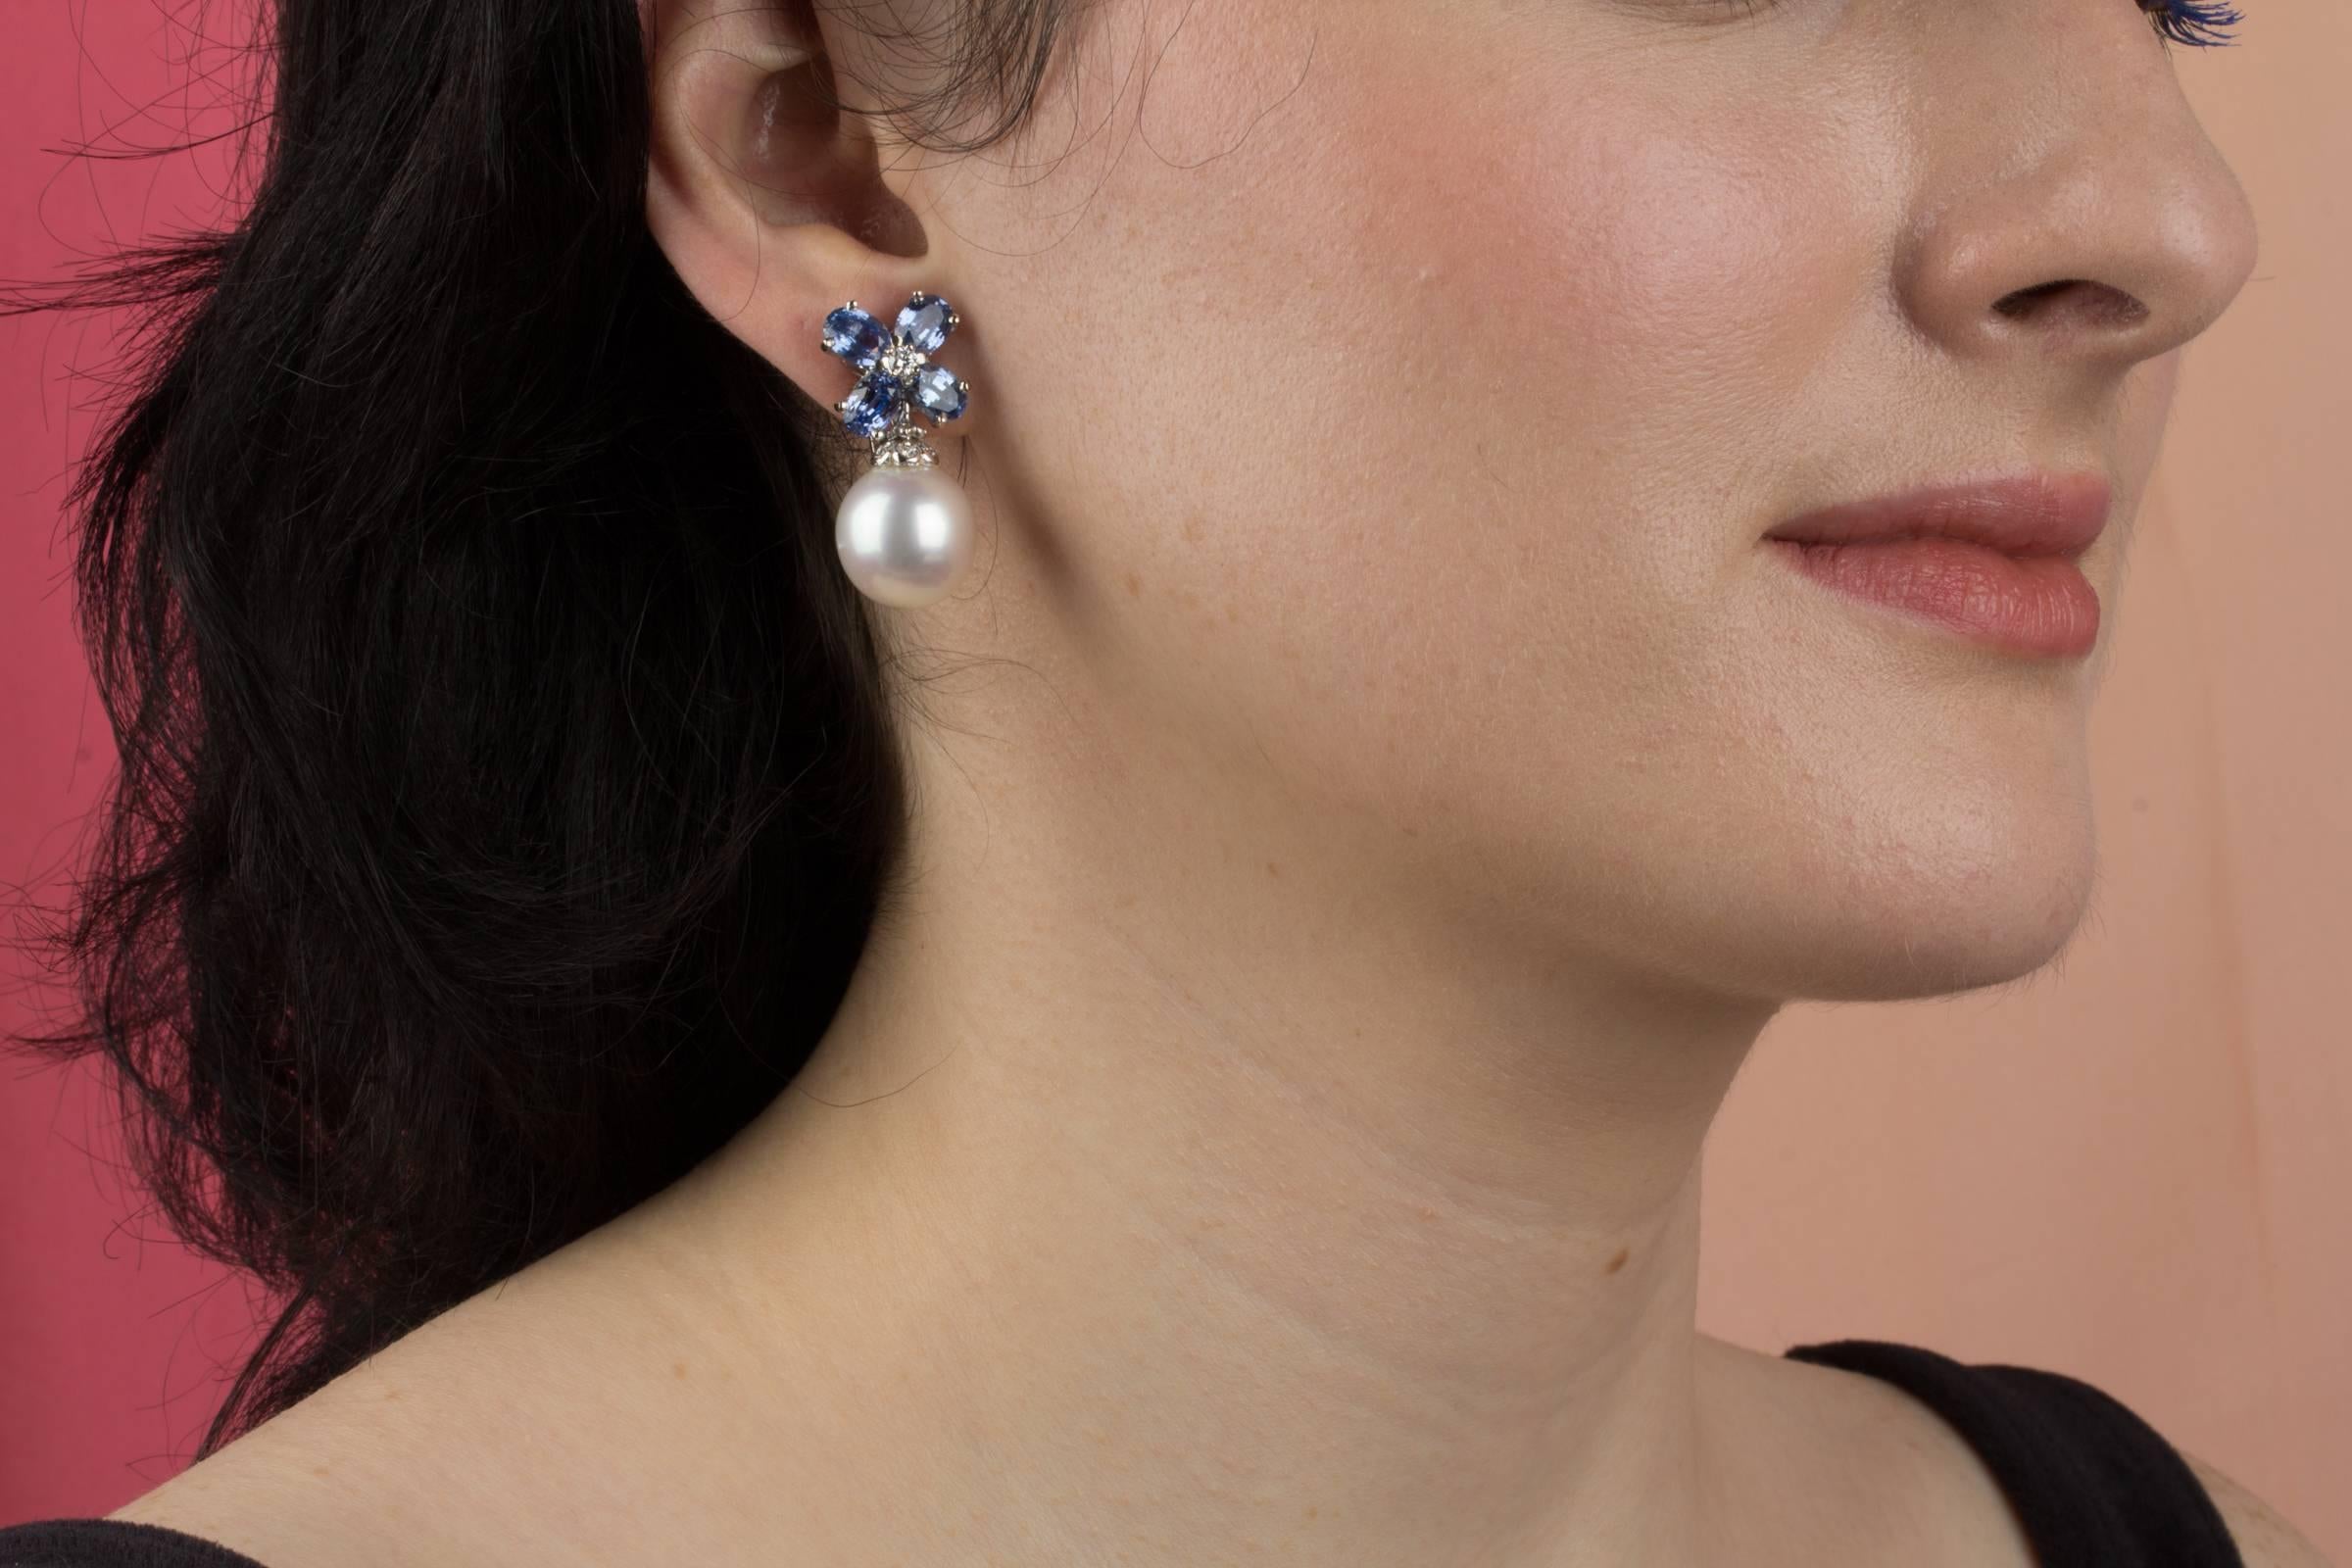 This pair of earrings features a flower design on the ear with 6.50 carats of oval cut faceted blue Ceylon sapphires. The tops suspend 2 South Sea pearls of 15 x 14.5 diameter. 0.30 carats of round diamonds complete the design.
All of our pearls are